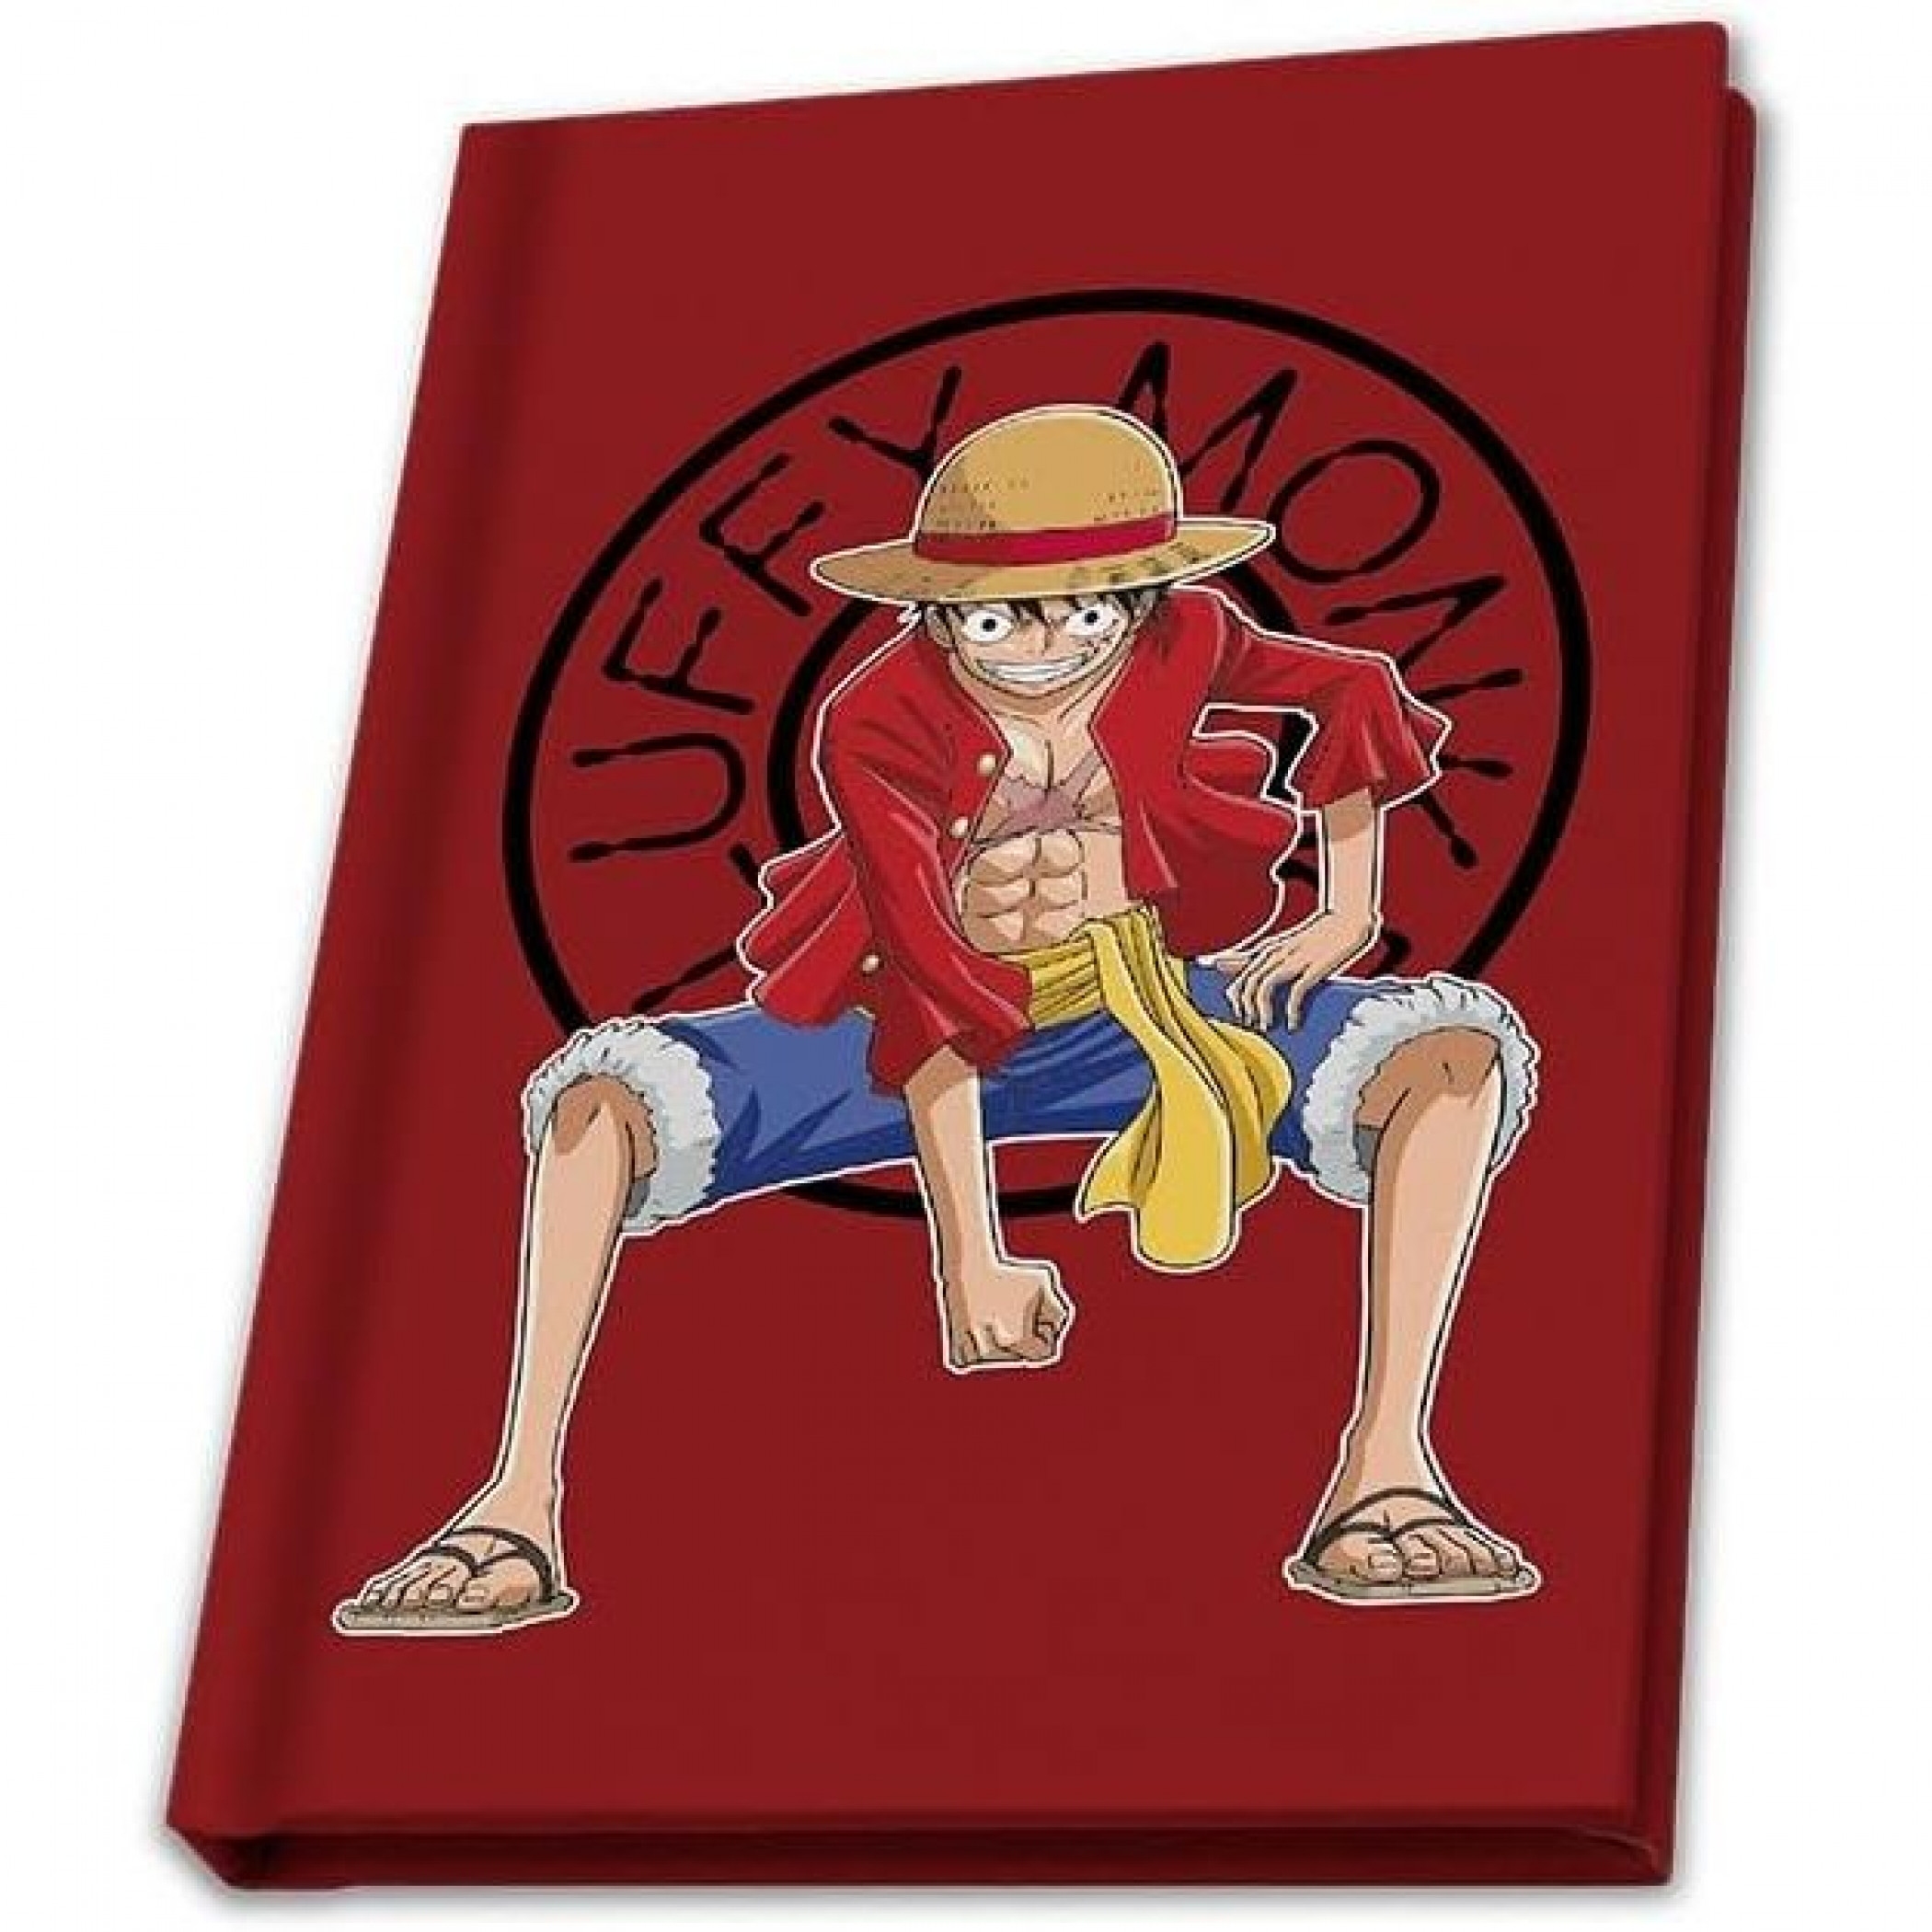 Abysse One Piece Luffy Mug Cup and Coaster Gift Set